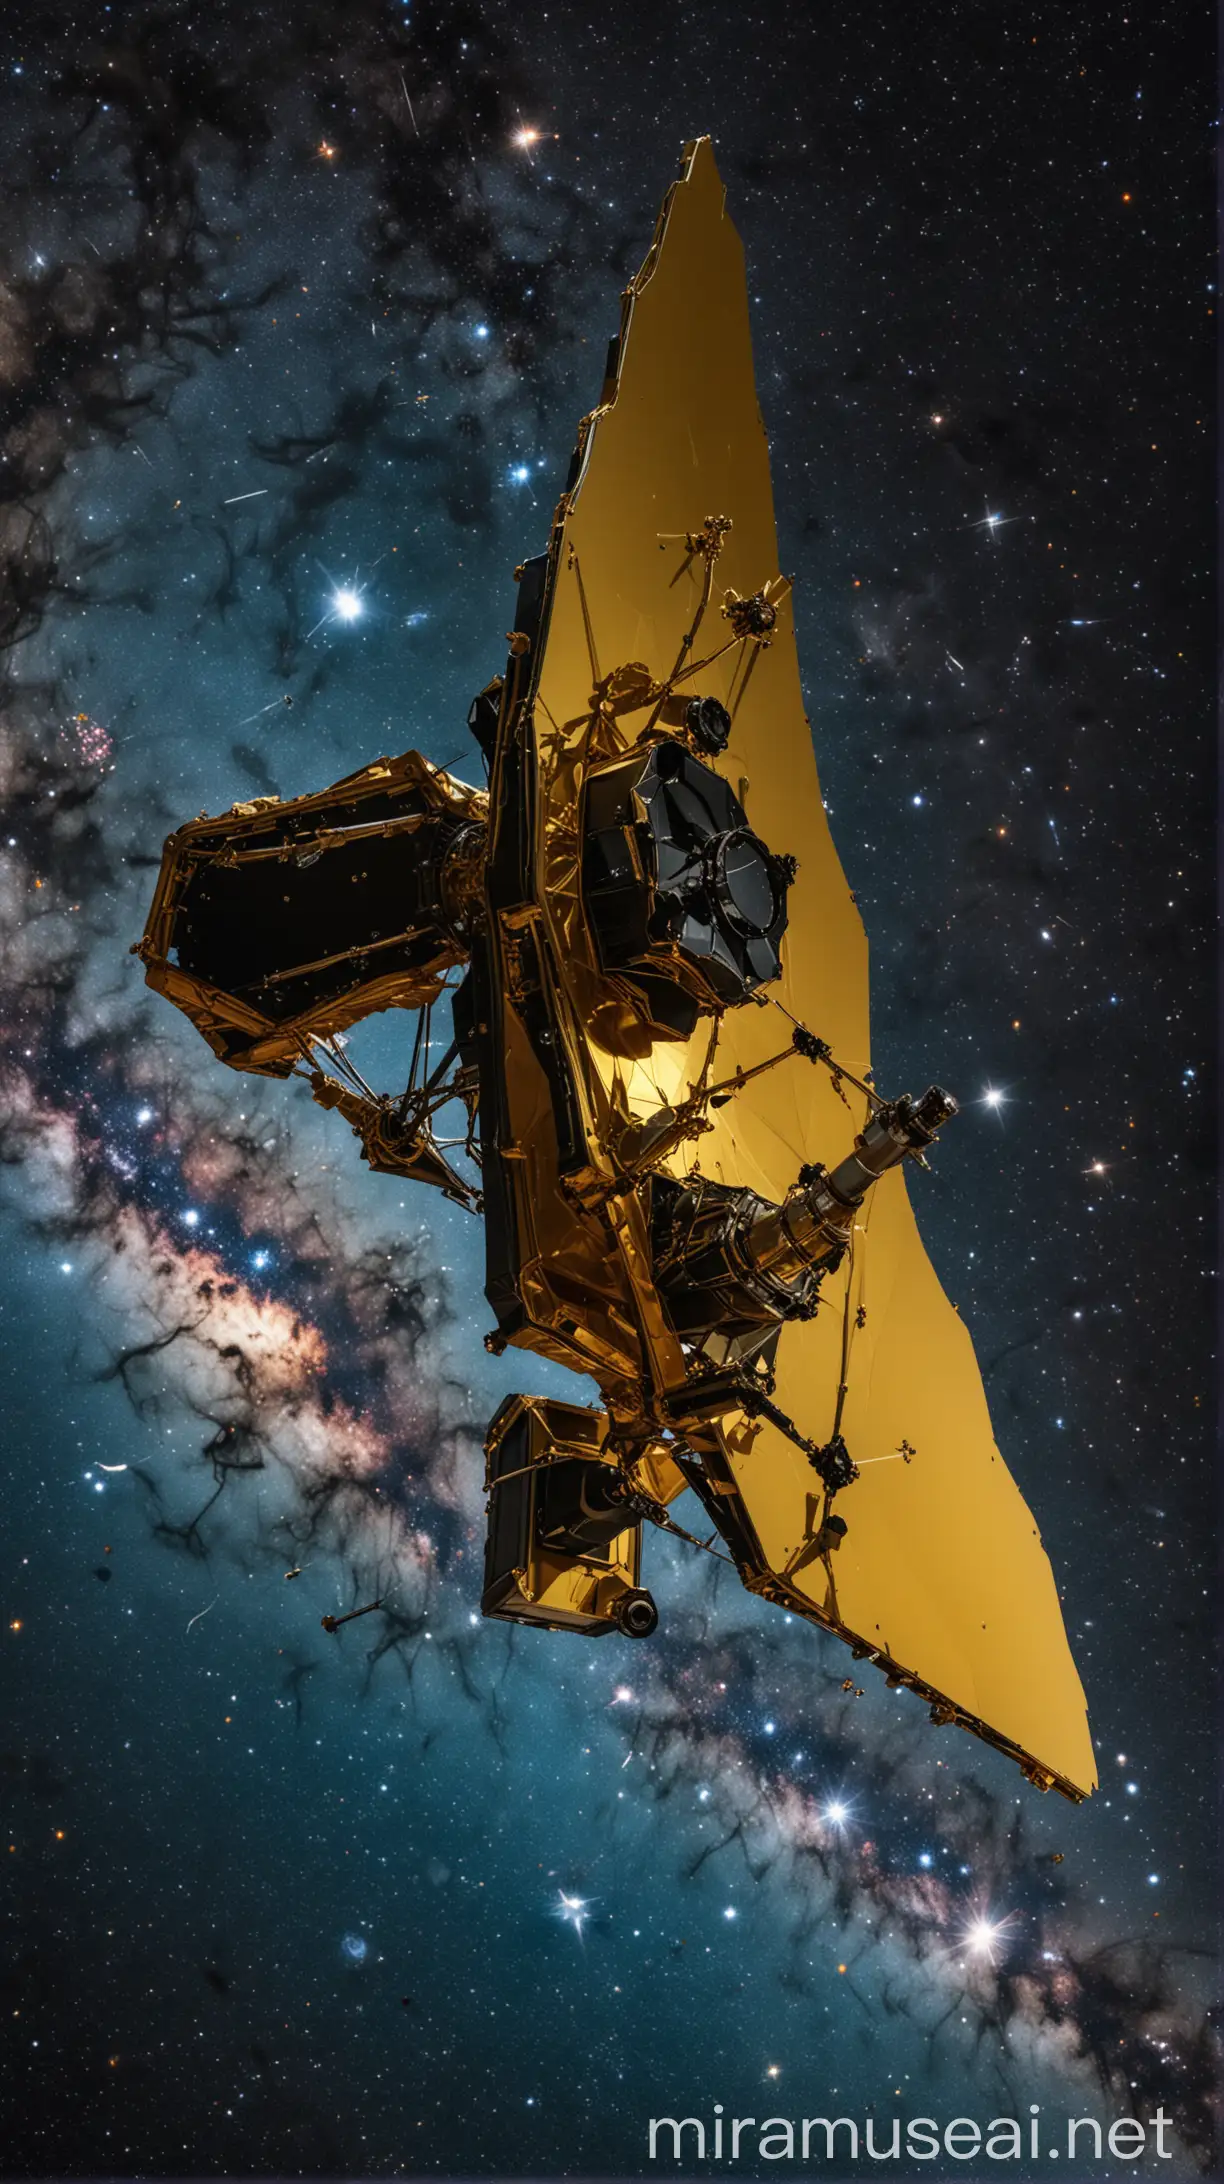 Majestic James Webb Space Telescope in Cosmic Dance with Earth